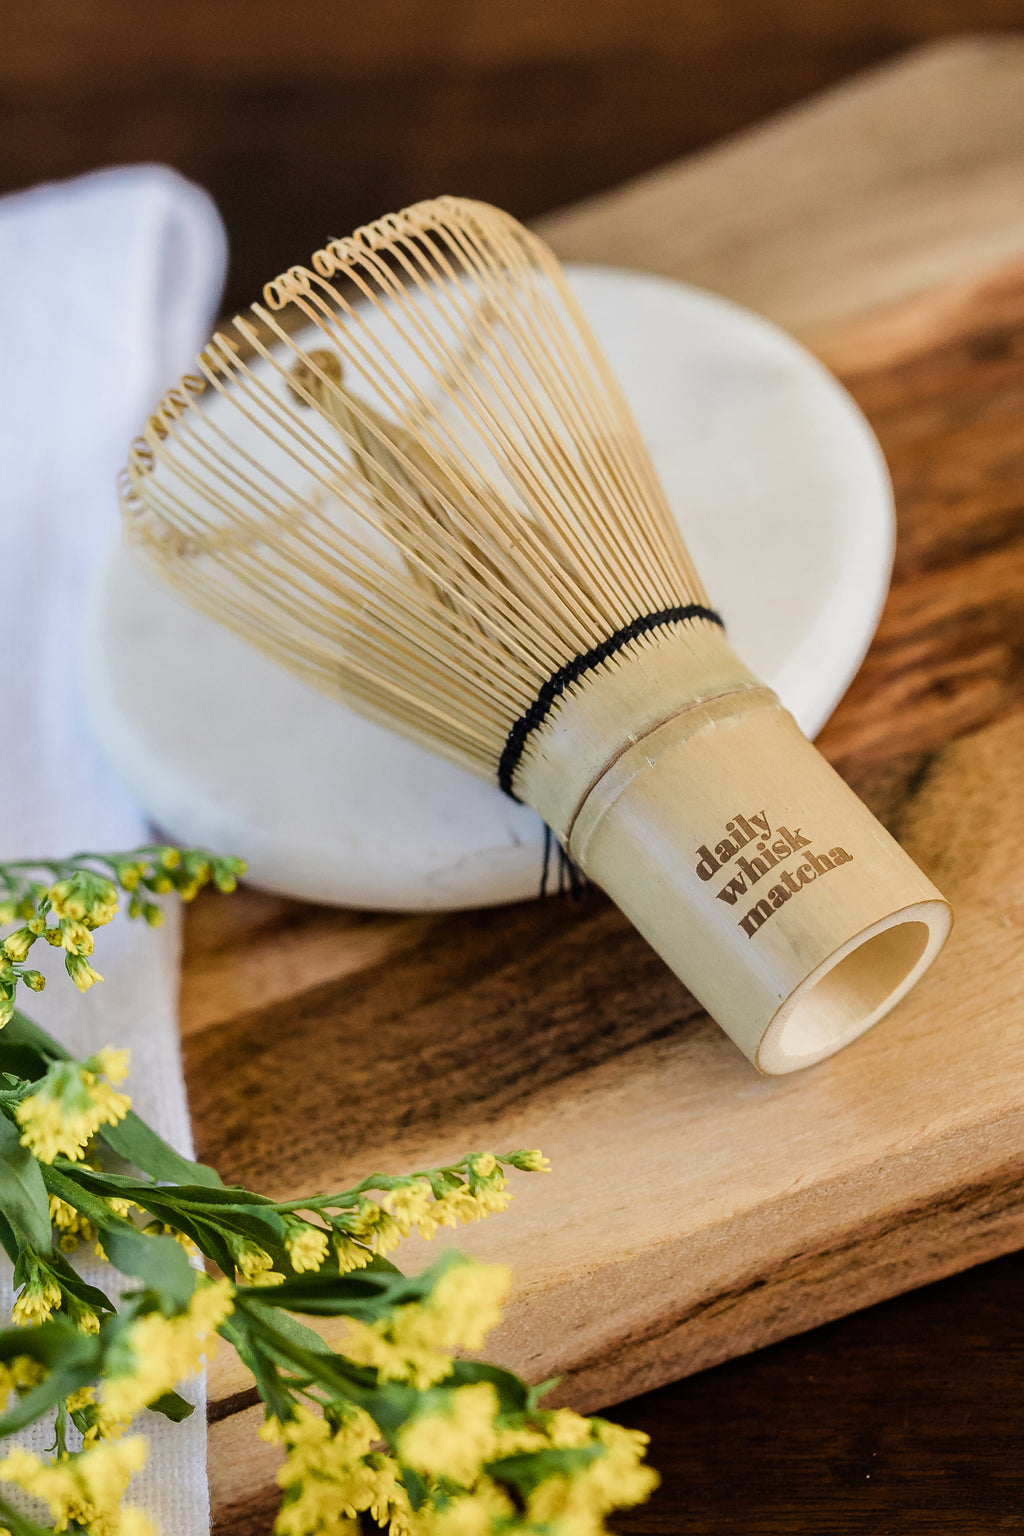 Chasen Matcha Whisk – Leaves and Flowers